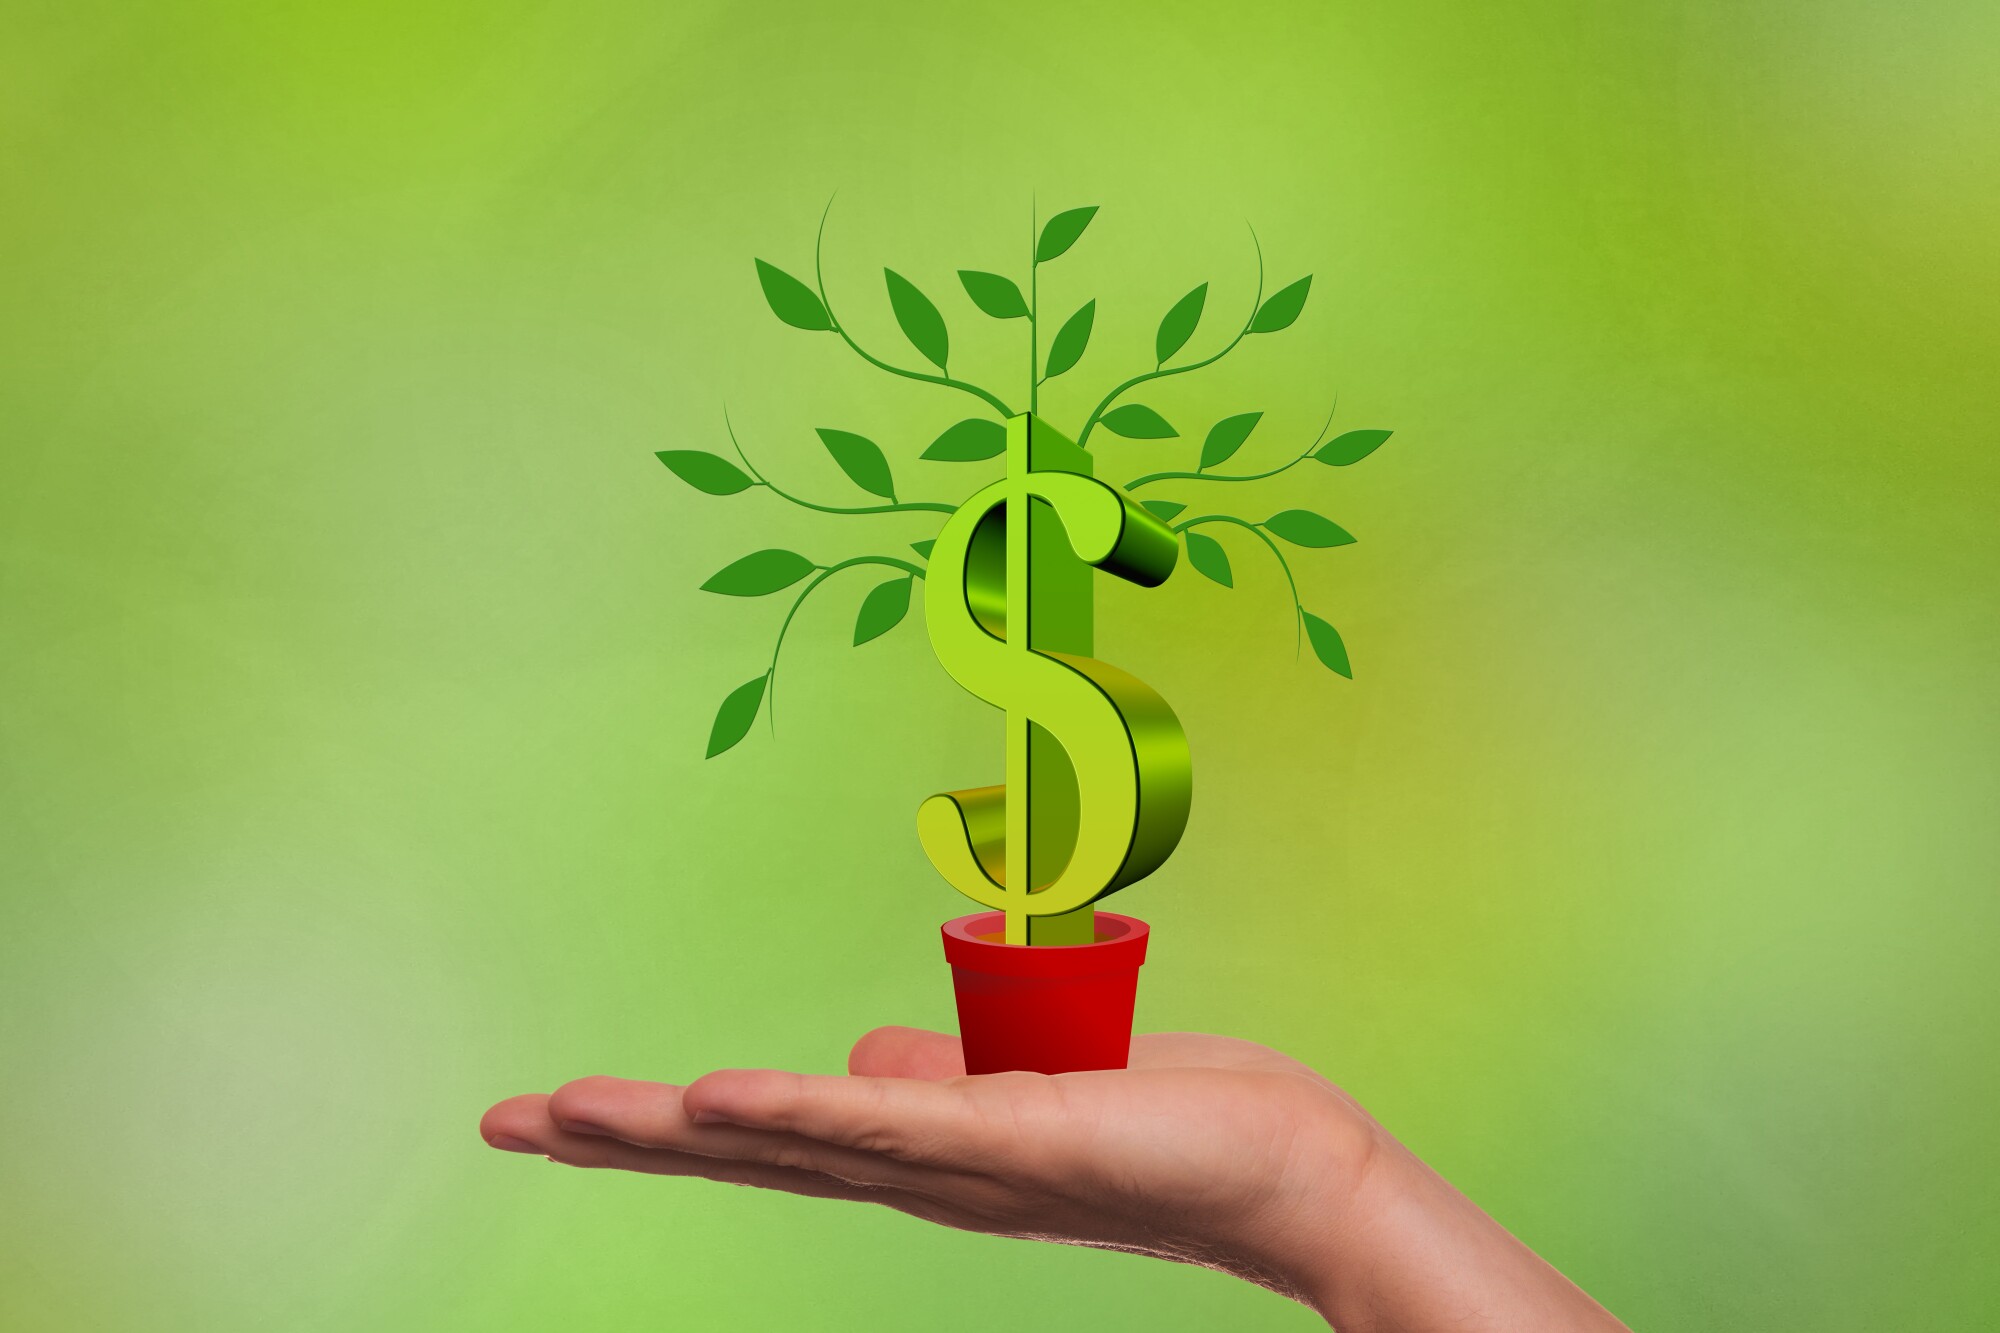 5 Signs Your Business Could Benefit From Growth Capital Services